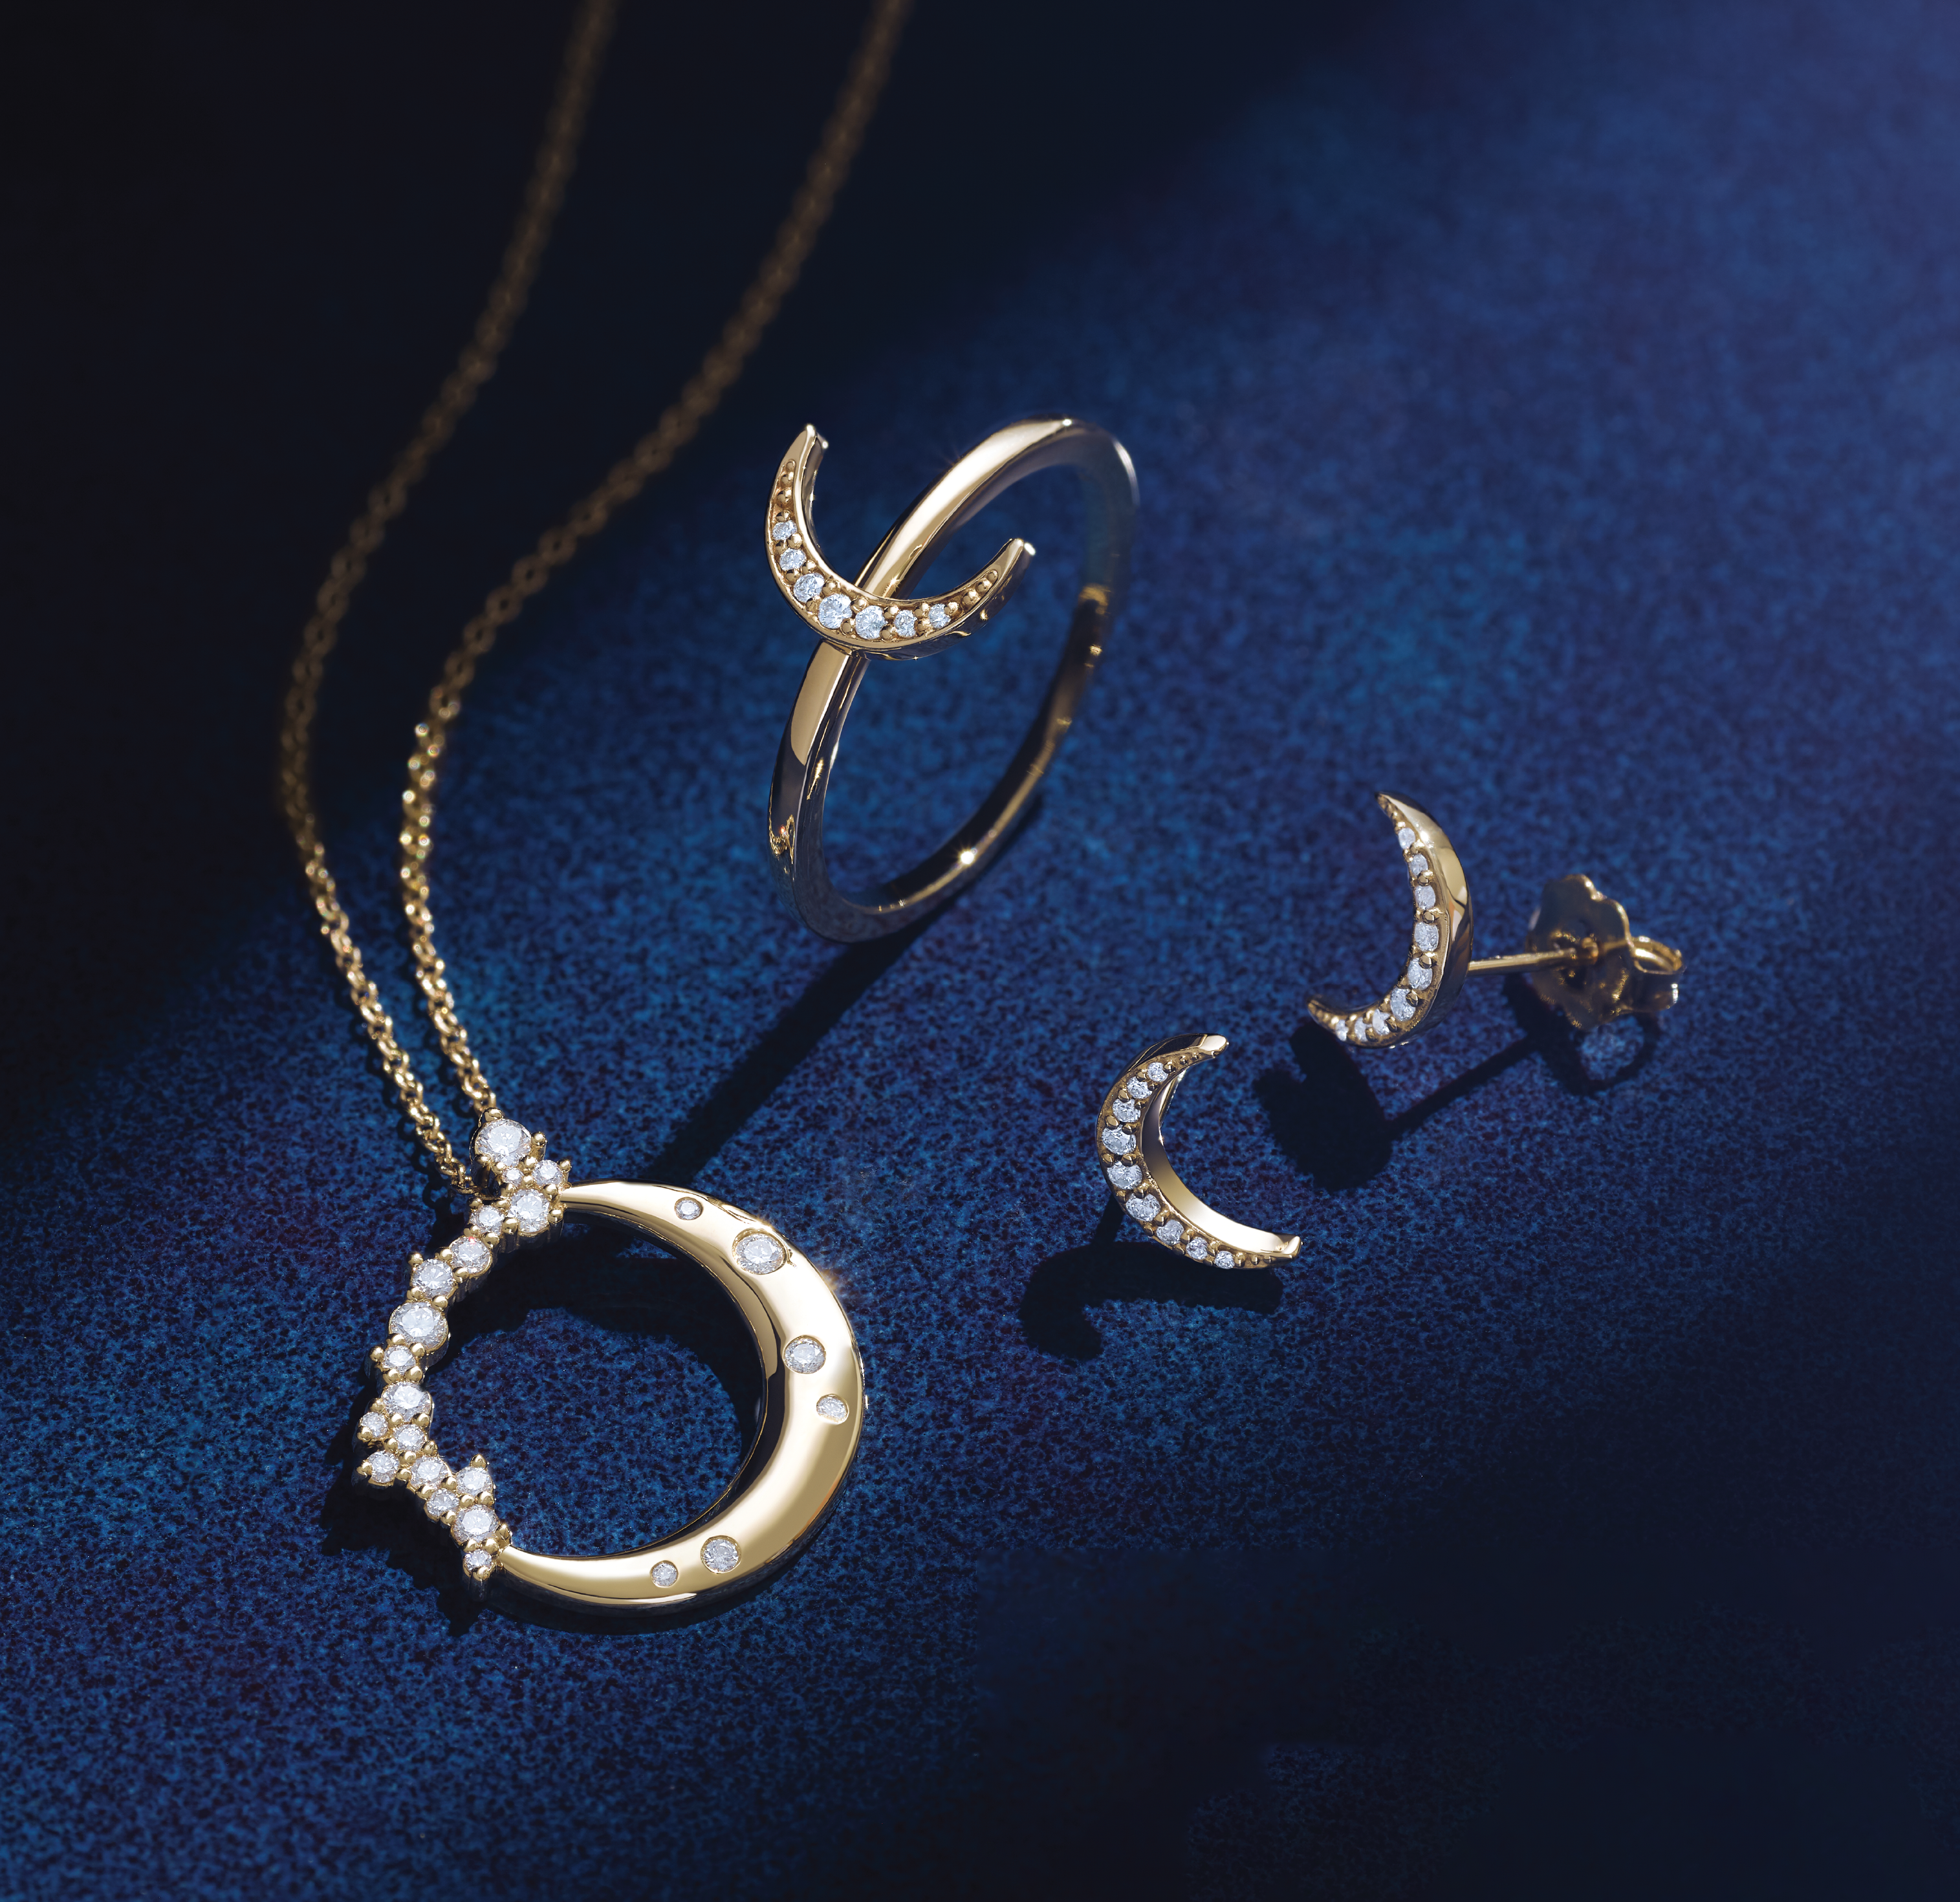 Yellow gold diamond crescent moon necklace with cresent gold ring and earrings